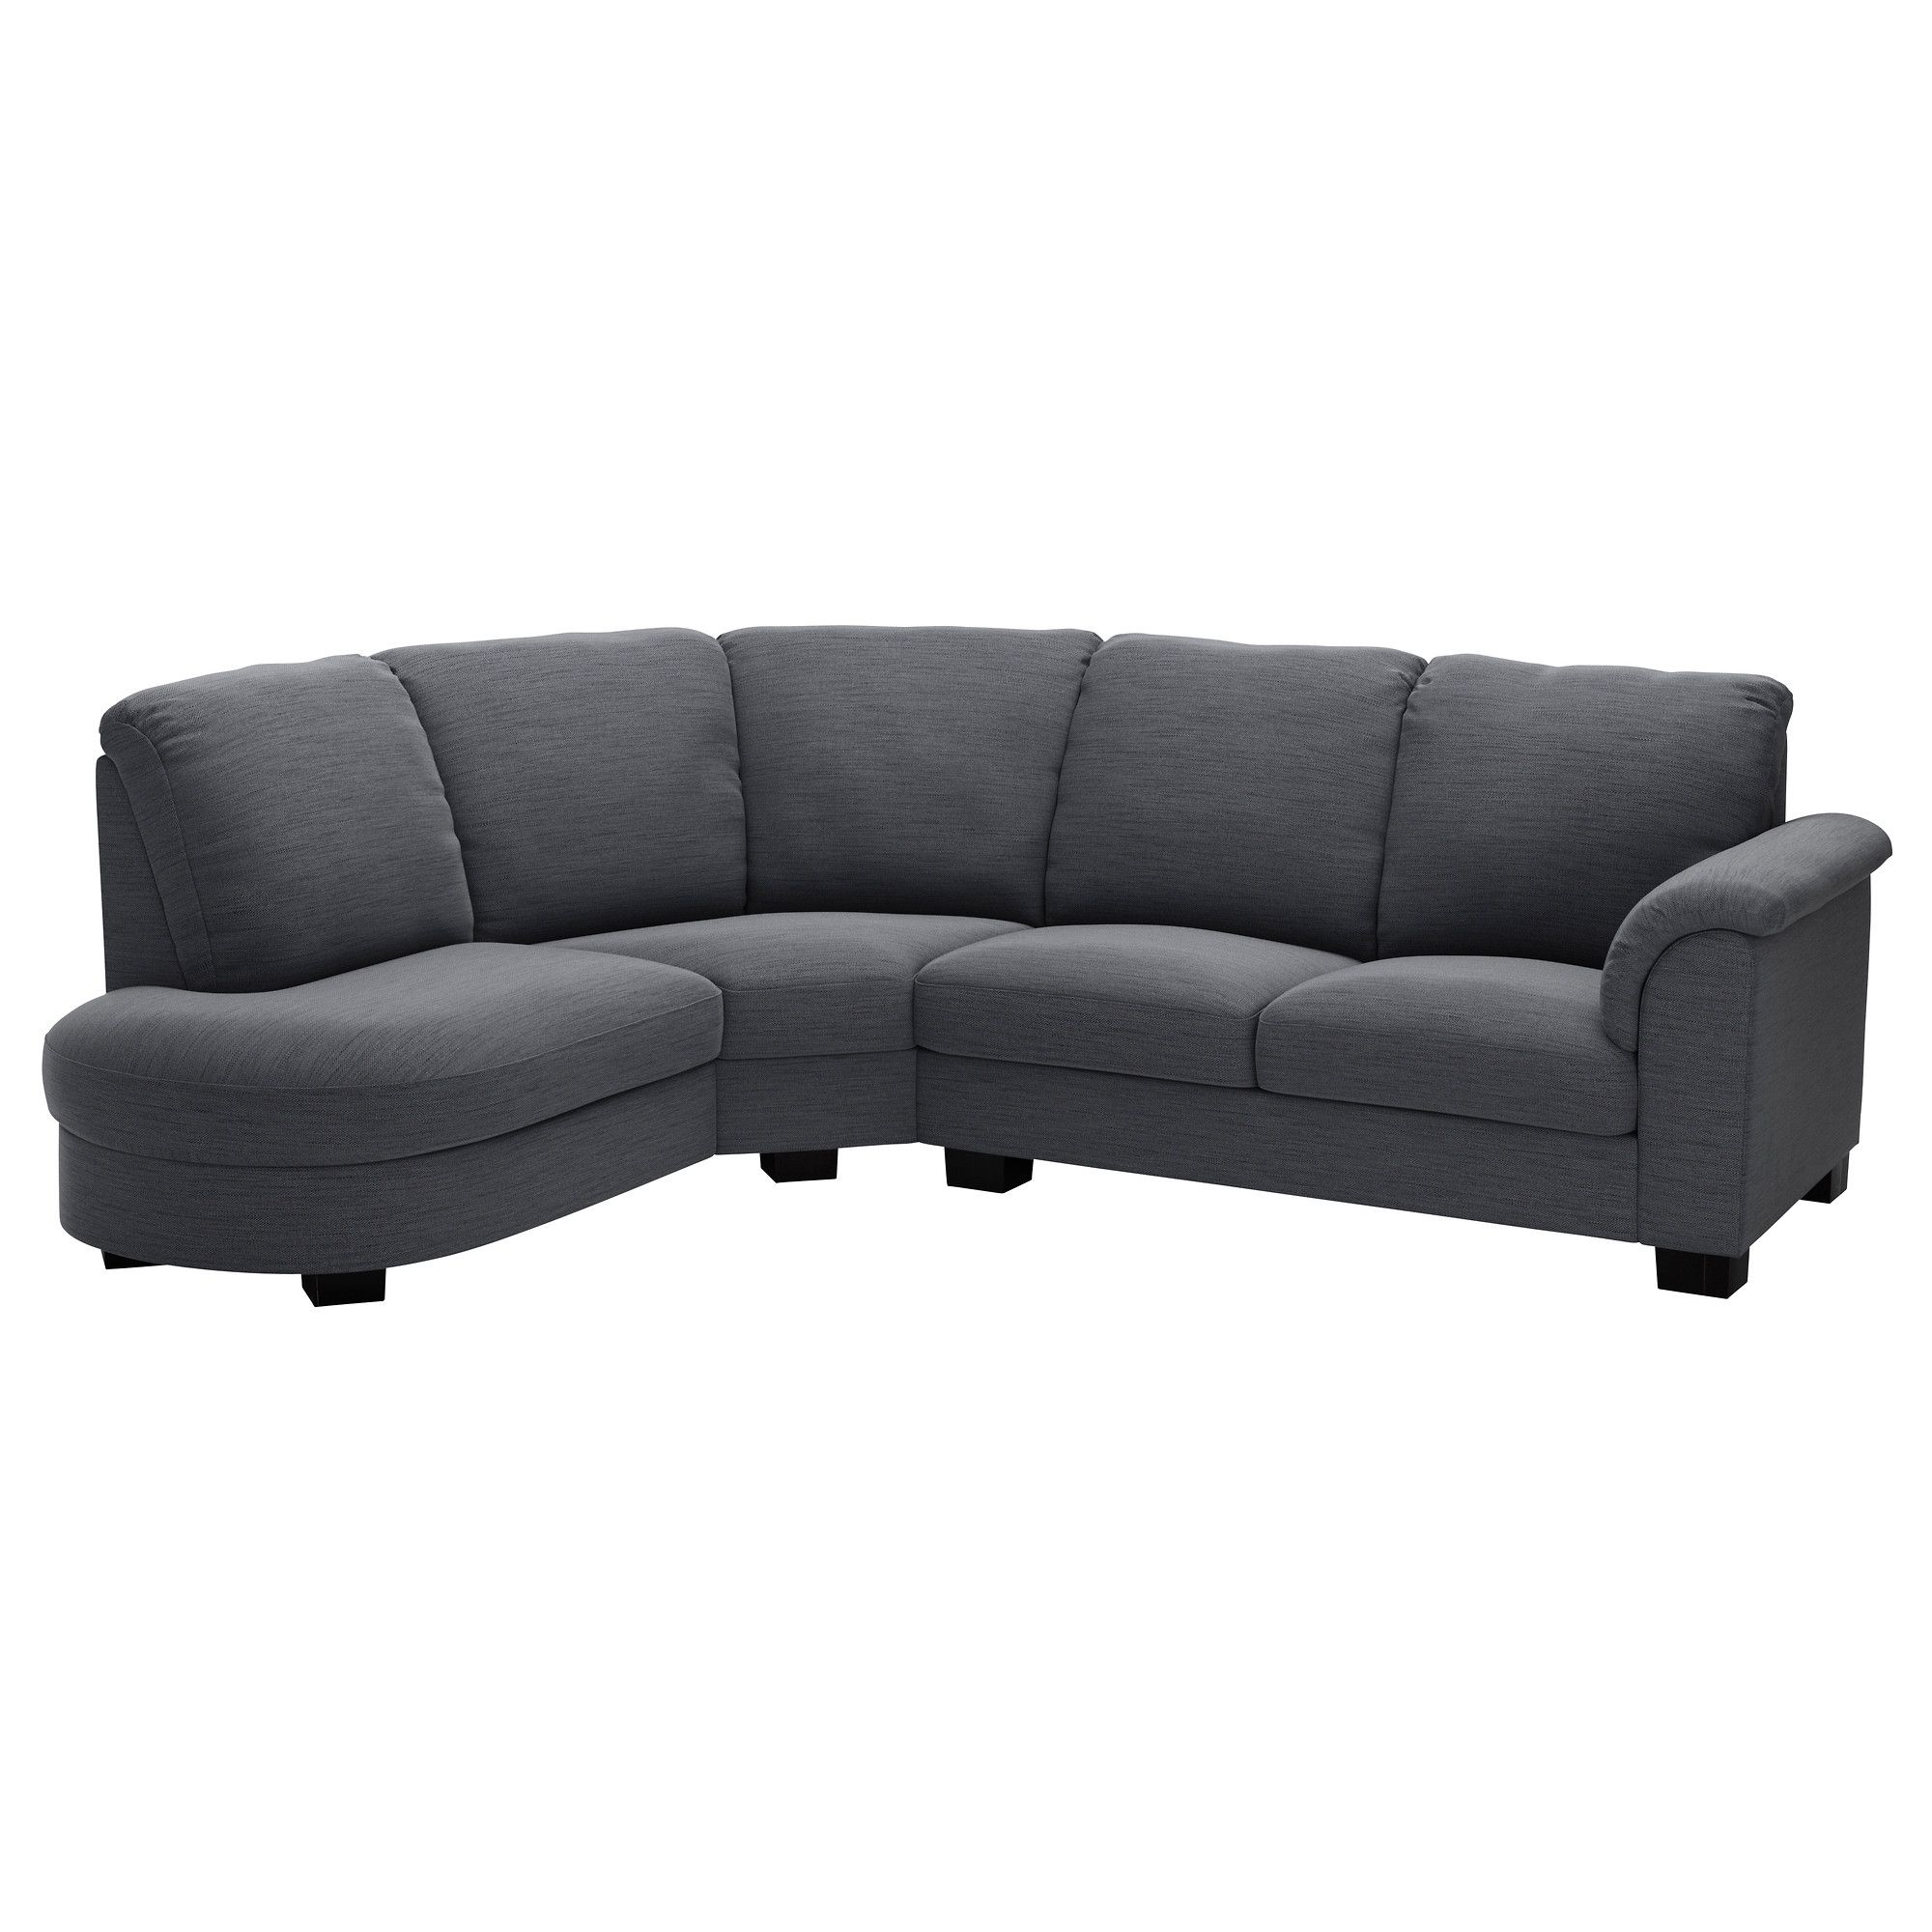 Tidafors Corner Sofa With Arm Left – Dansbo Medium Brown – Ikea In Most Recently Released Fabric Corner Sofas (View 7 of 15)